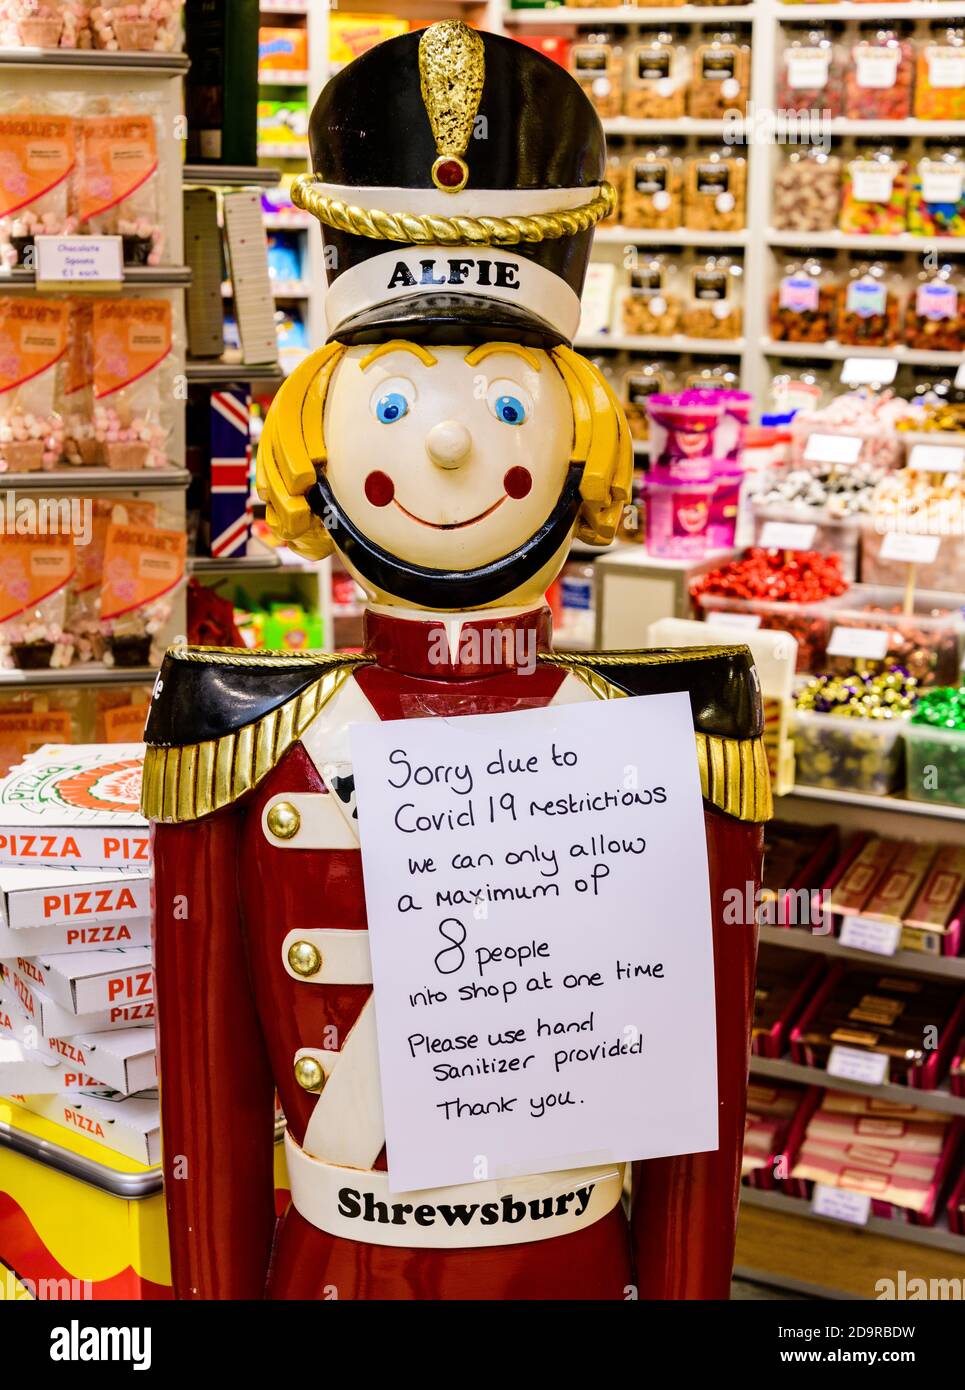 Model life size soldier in Shrewsbury sweetshop holding sign restricting number of people in shop due to covid Stock Photo